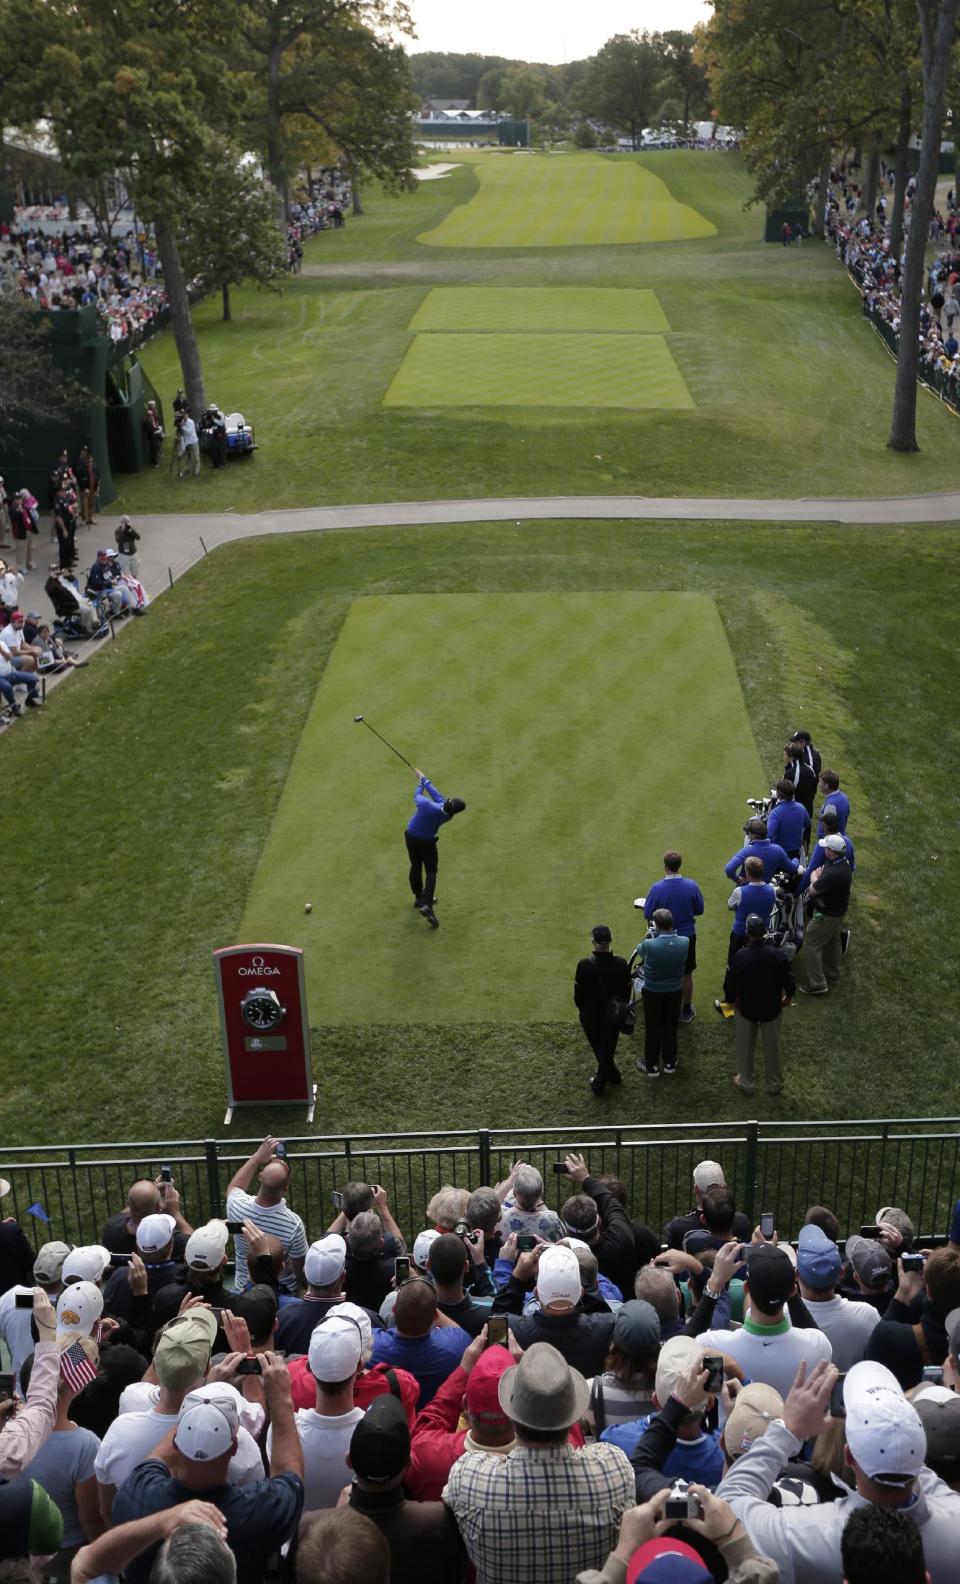 Europe's Rory McIlroy hits a drive on the first hole at the Ryder Cup PGA golf tournament Wednesday, Sept. 26, 2012, at the Medinah Country Club in Medinah, Ill. (AP Photo/Charlie Riedel)